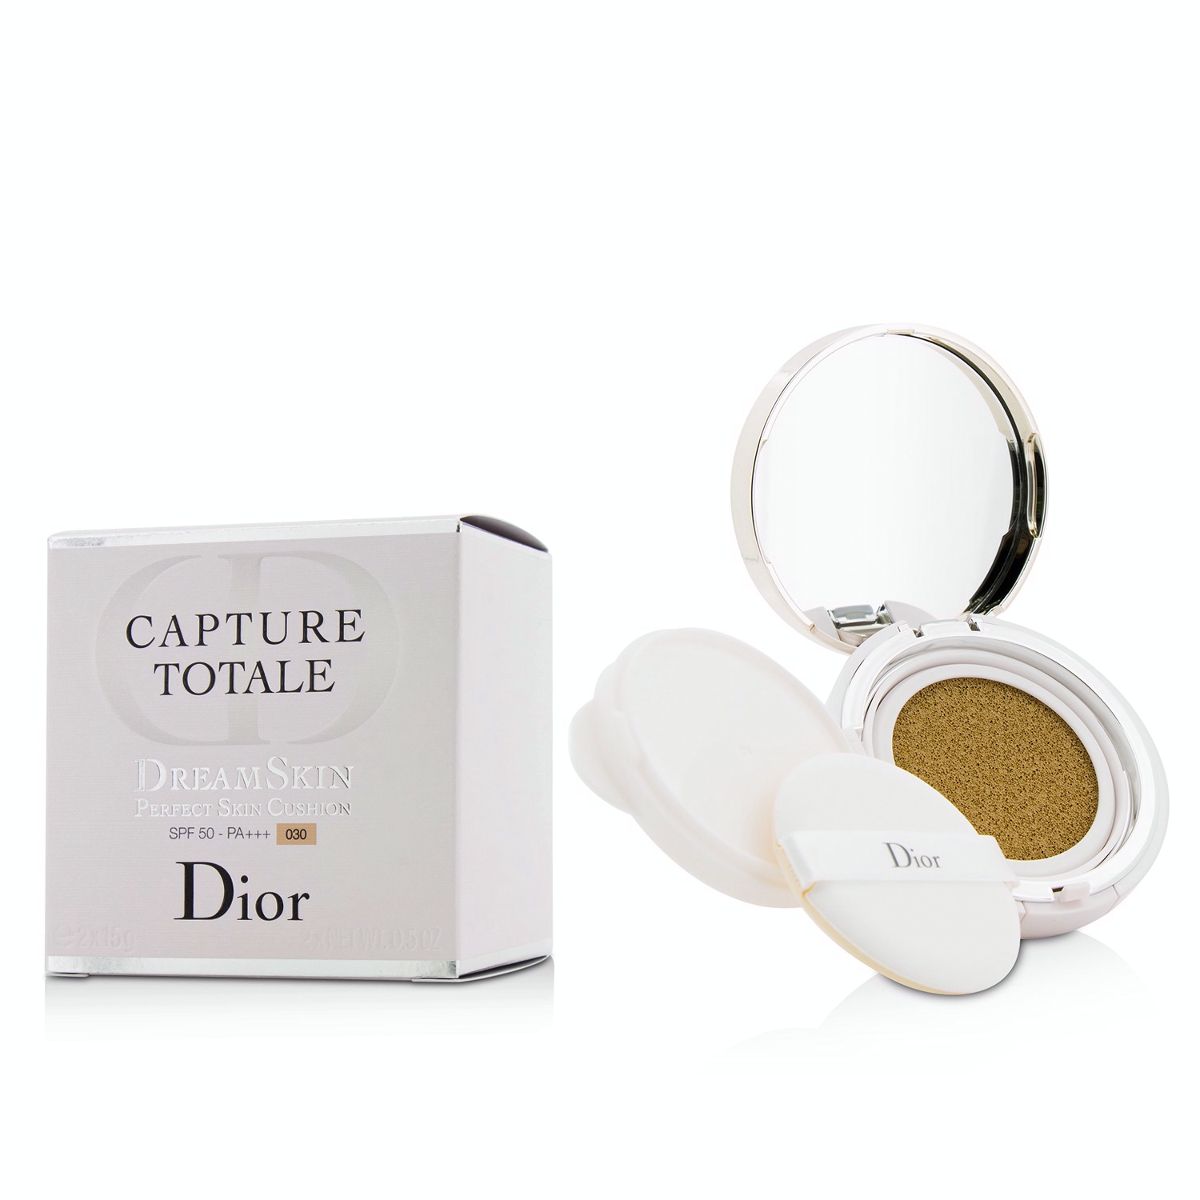 Capture Totale Dreamskin Perfect Skin Cushion SPF 50  With Extra Refill - # 030 Christian Dior Image